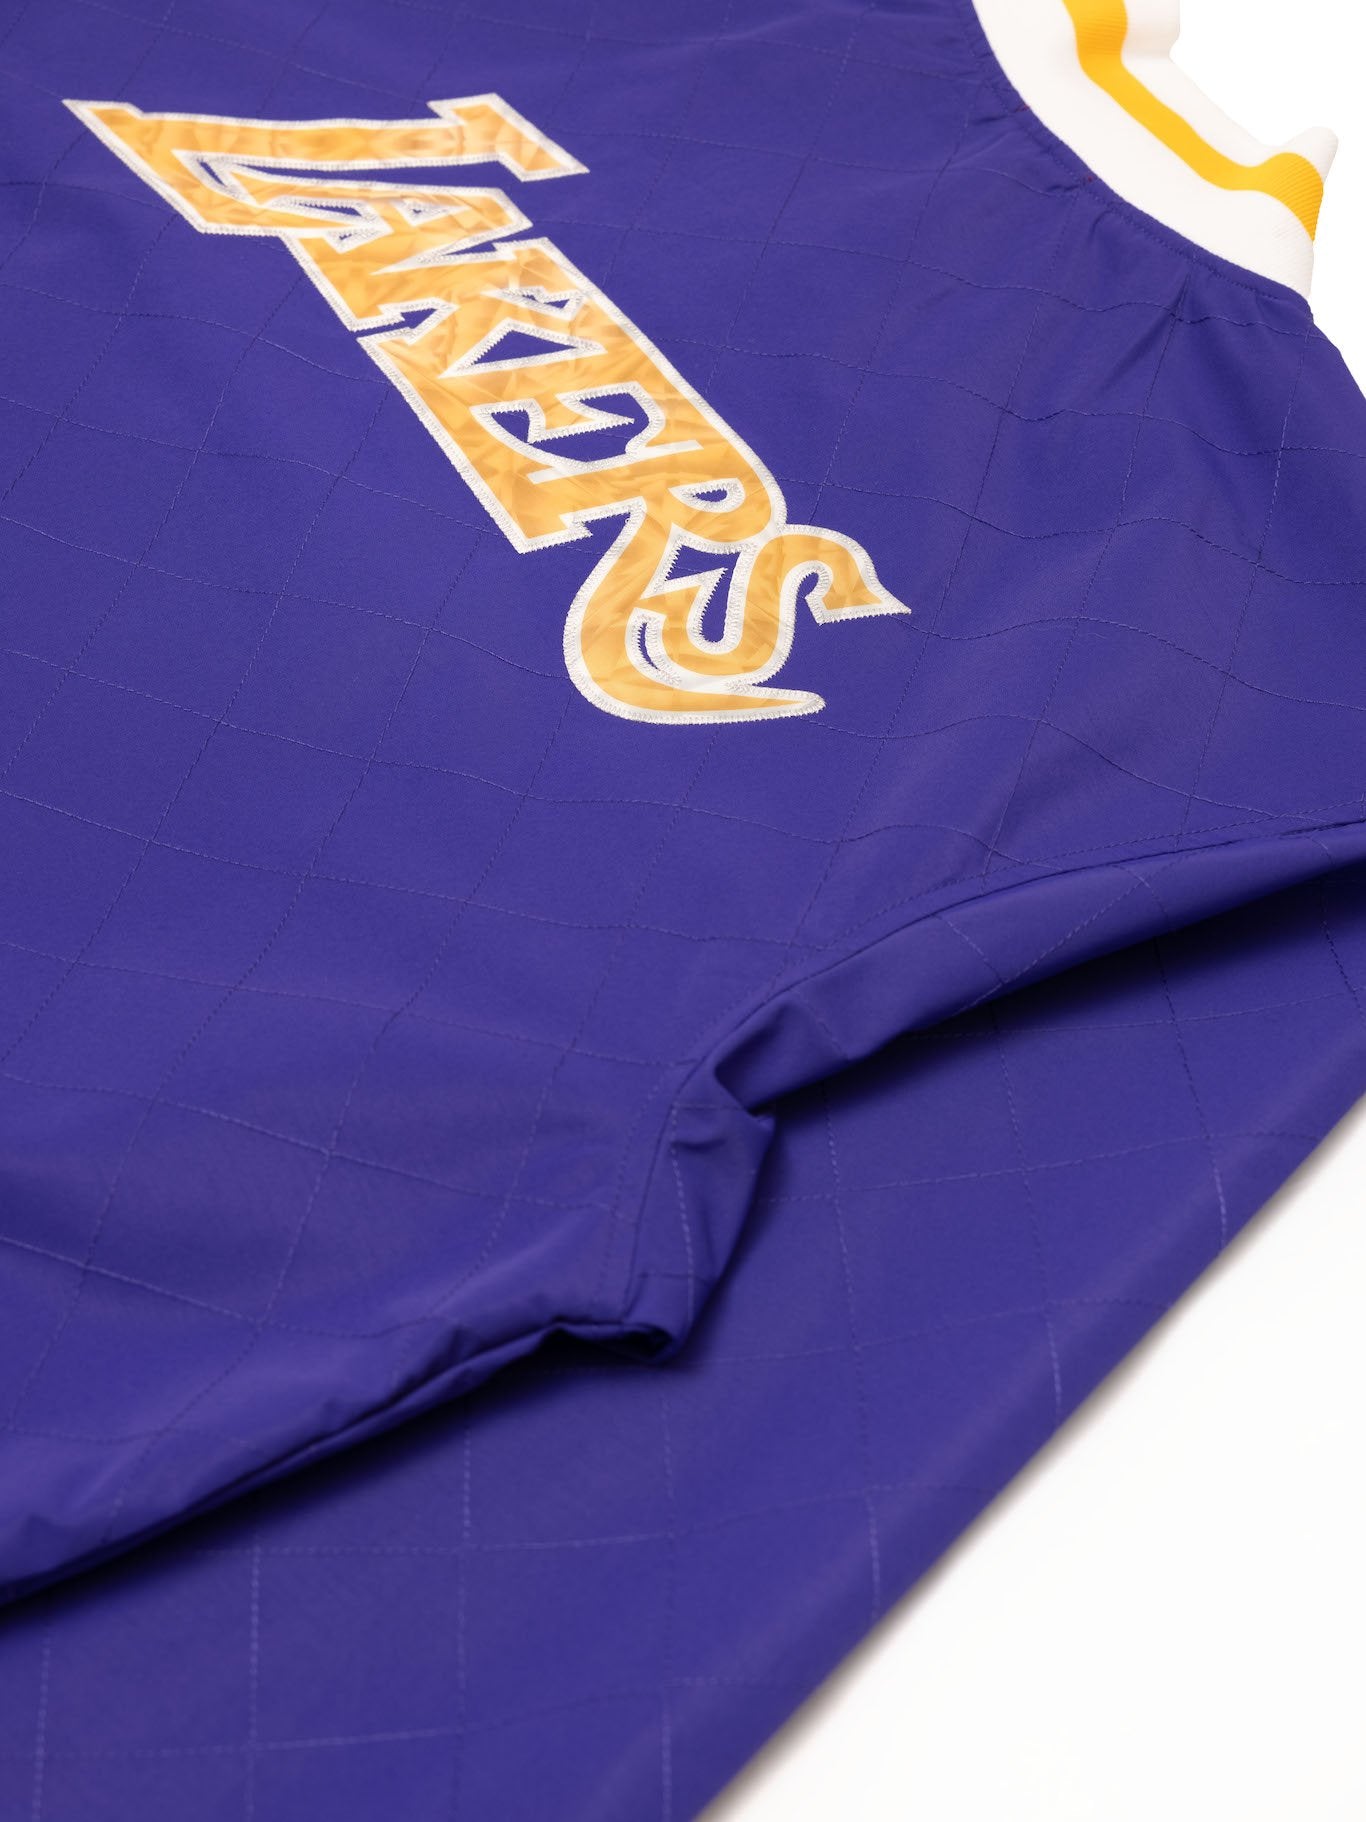 Mitcell & Ness LA Lakers 75th Anniversary Warm Up Jacket